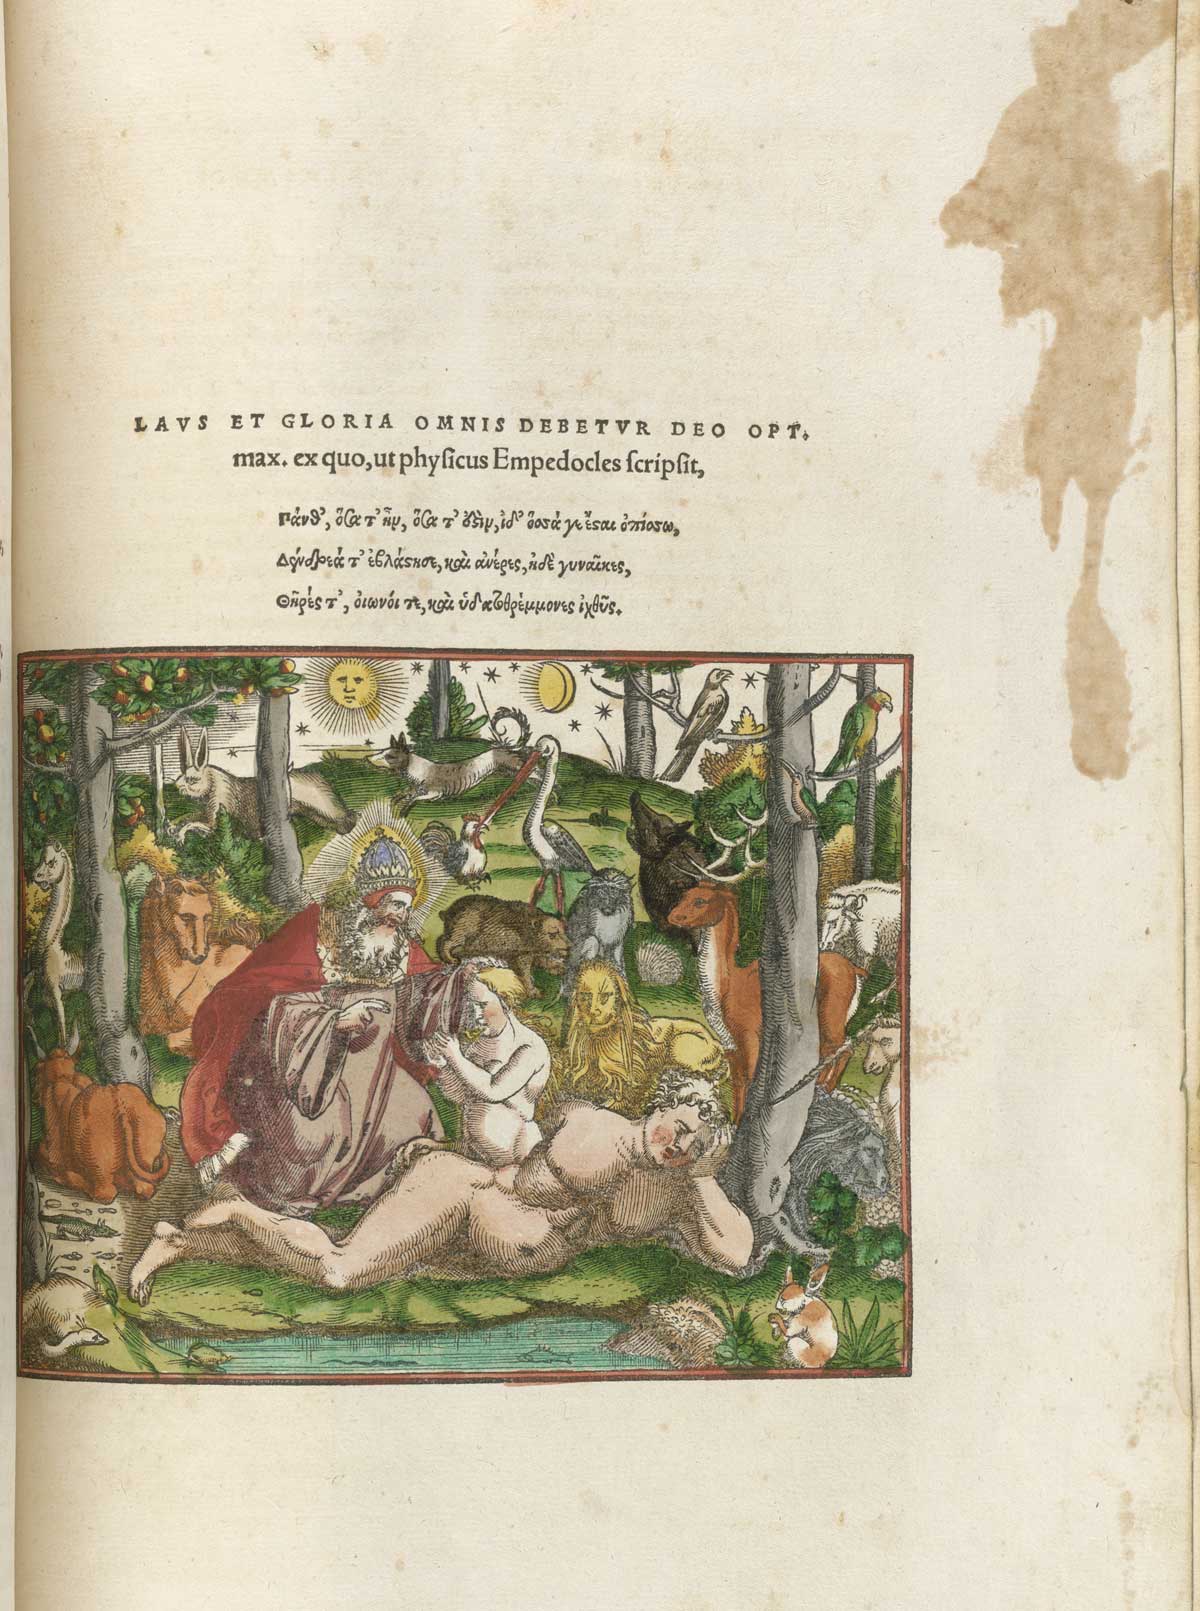 The colophon from volume 1 of Conrad Gessner's Conradi Gesneri medici Tigurini Historiae animalium, featuring the colored woodcut of the Garden of Eden with Adam and Eve and all of the animals.